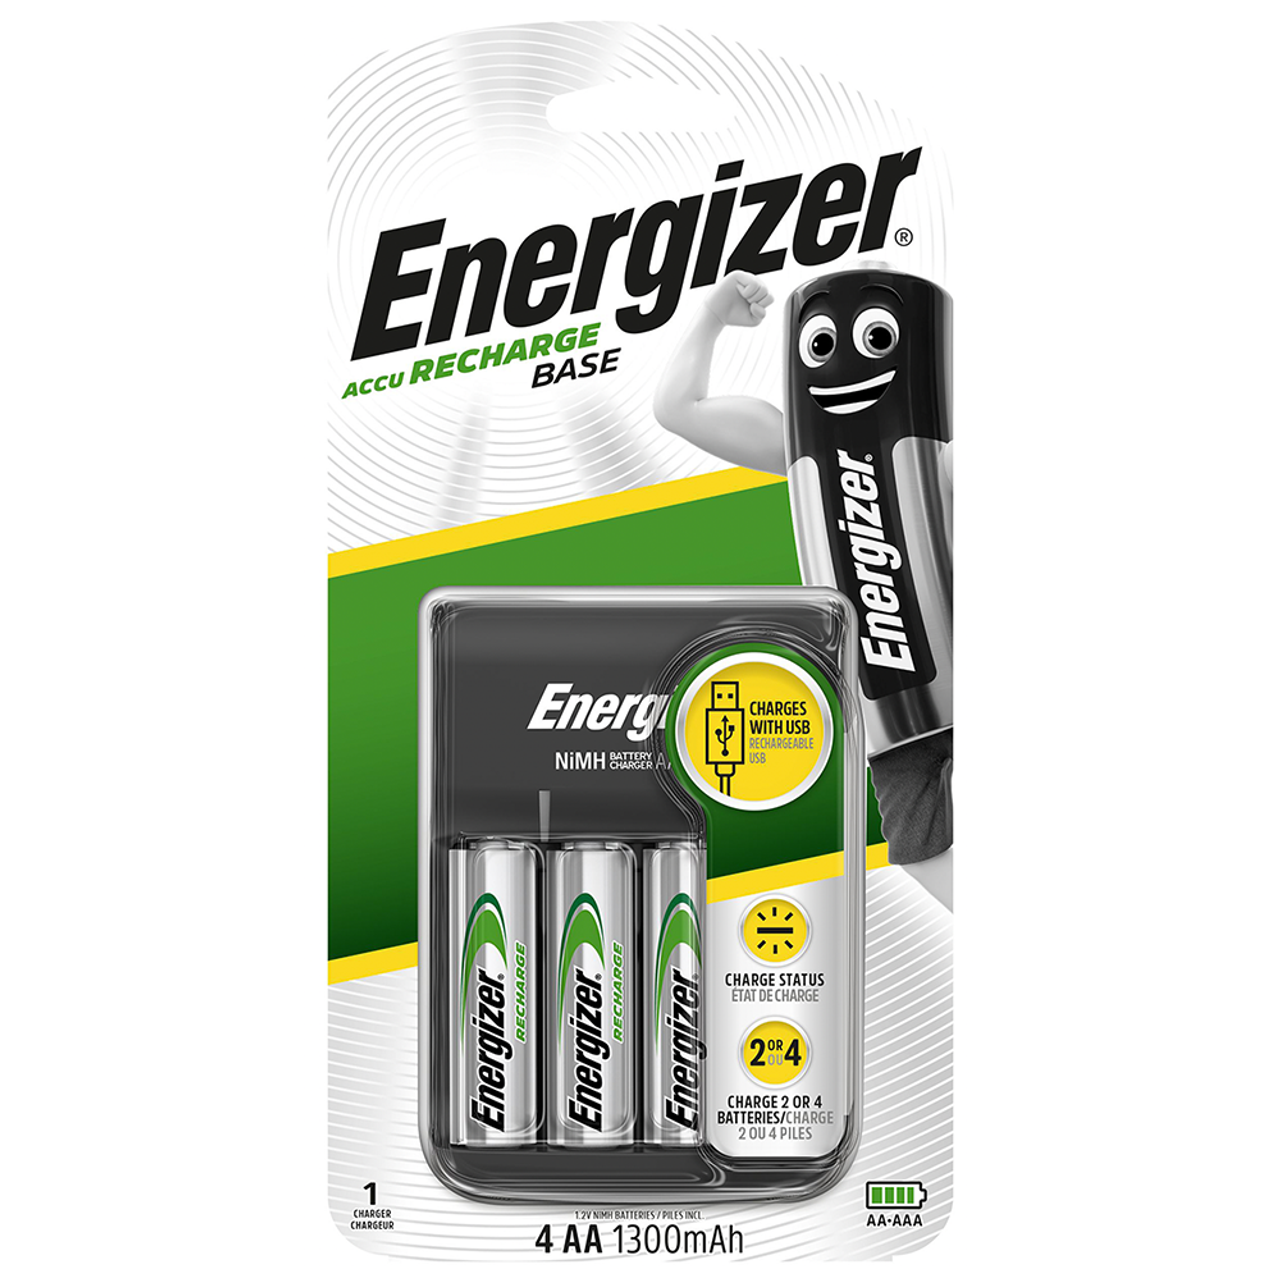 Energizer Universal AA HR6 1300mAh Rechargeable Batteries | 4 Pack